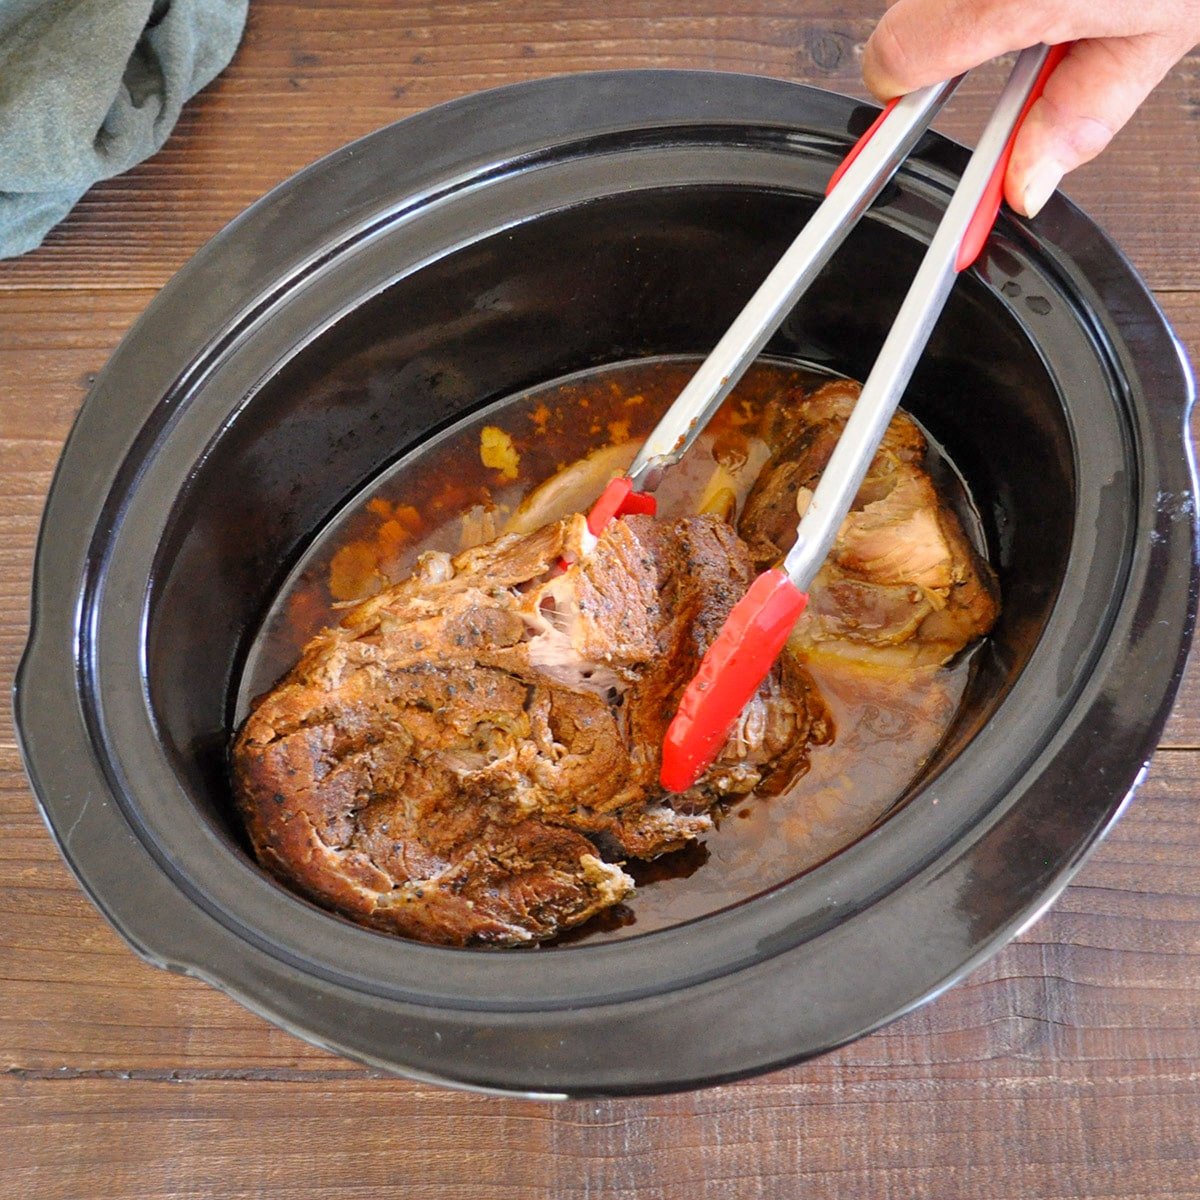 pork butt in a crock pot that has finished cooking being lifted with red tongs